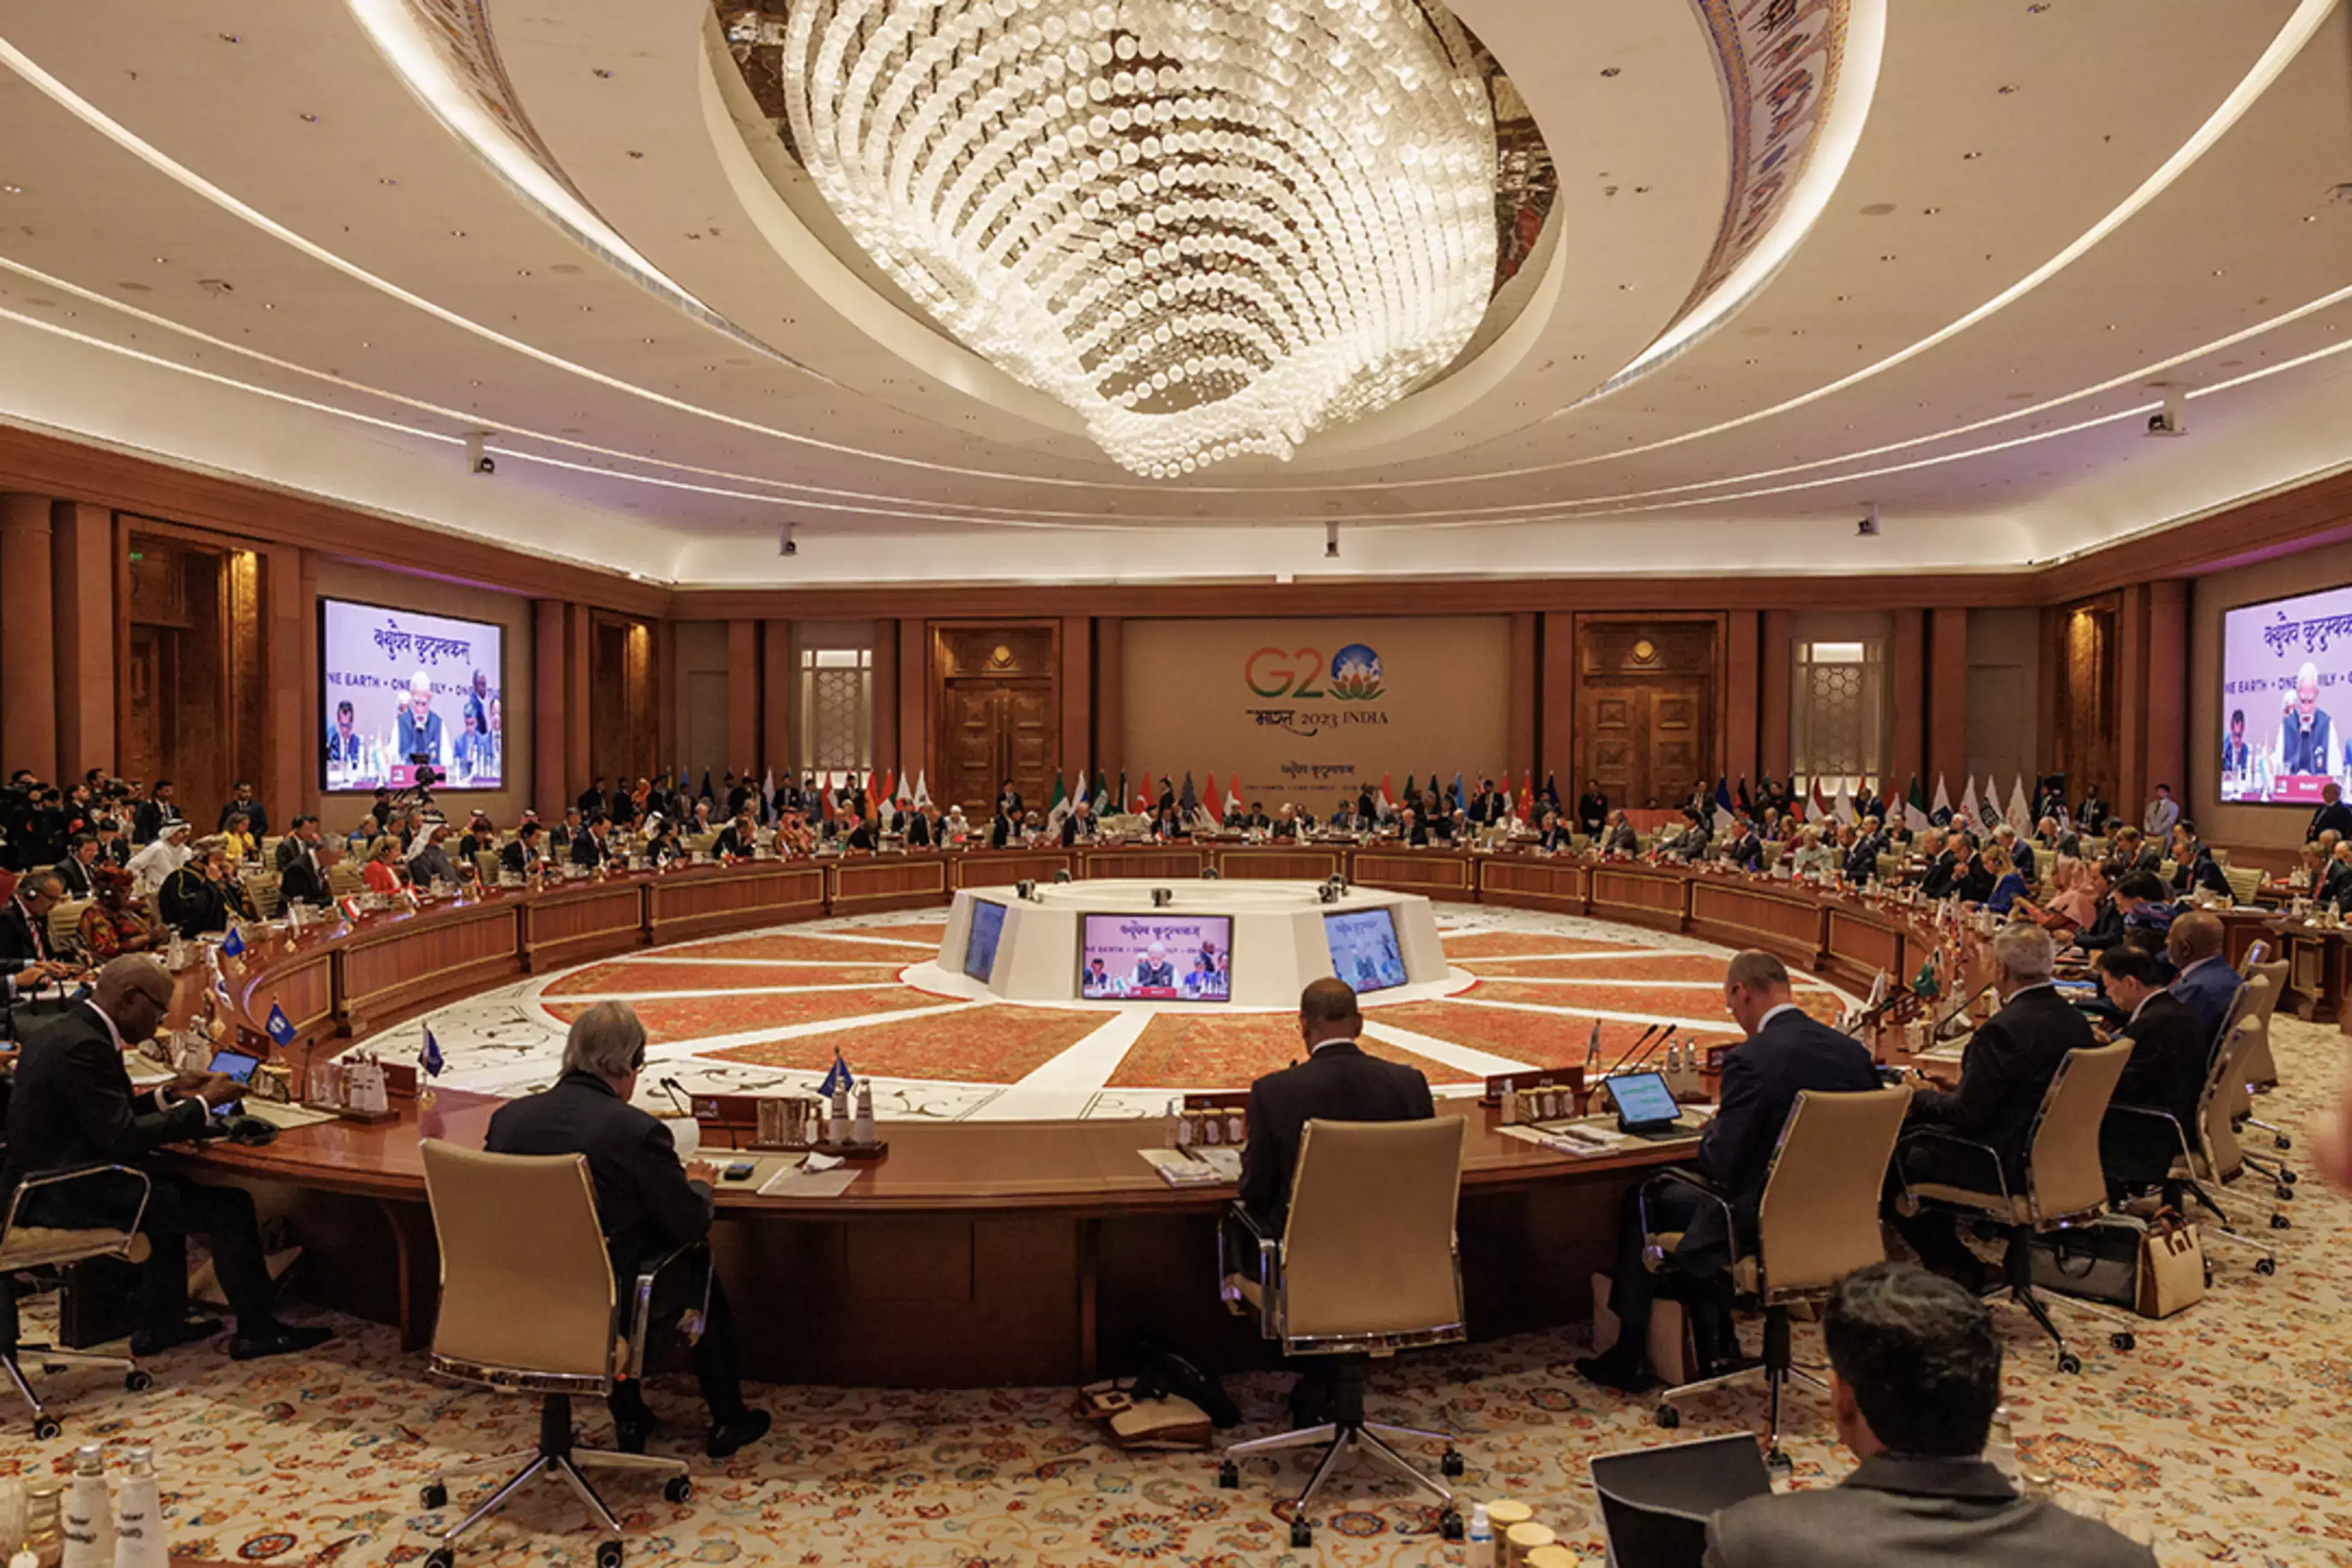 World leaders meet at the 2023 G20 summit in New Delhi, India.